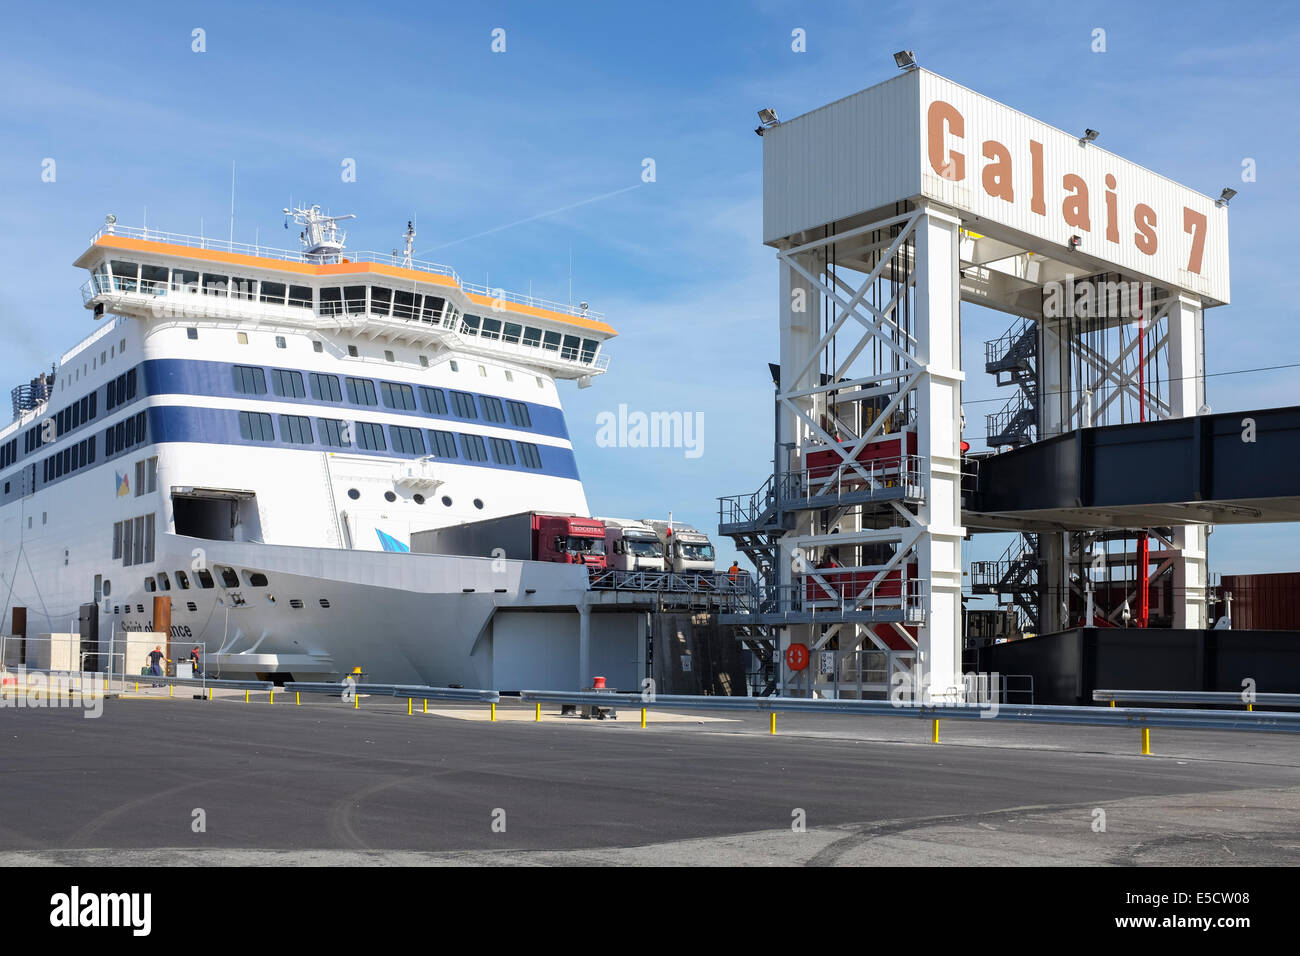 P&O ferry arriving at gate 7 of Port of Calais, France Stock Photo